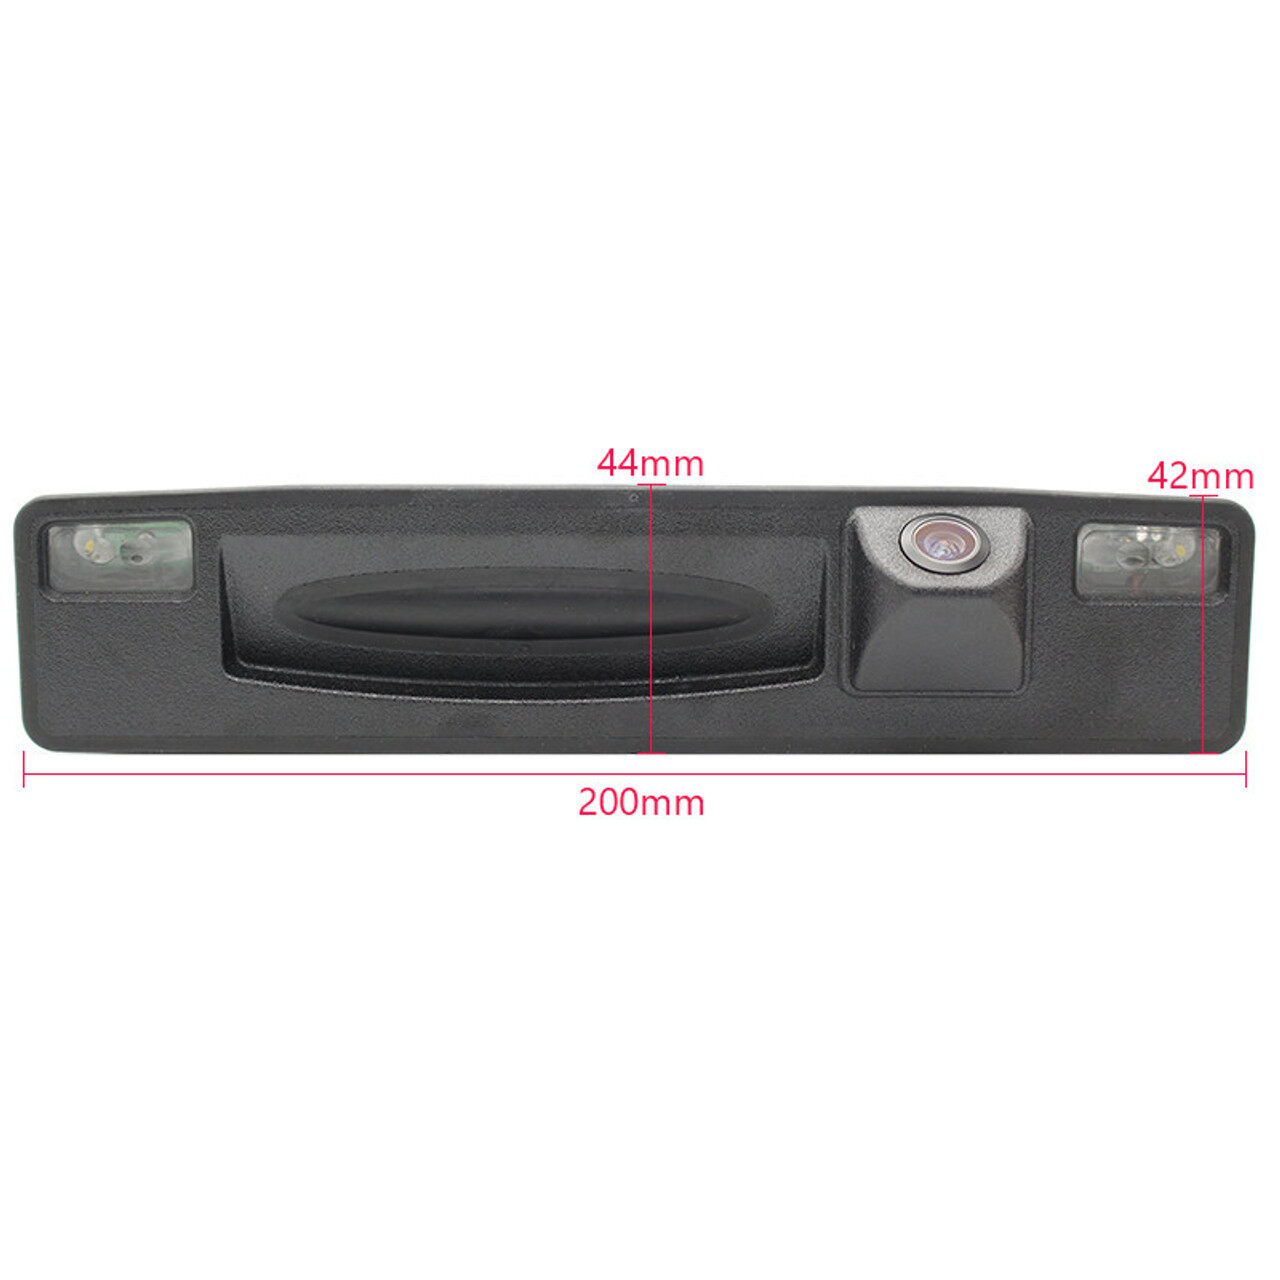 ZK-155 Boot Handle Rear Reverse Camera For Ford Focus Mk3 & Ford Fiesta Mk8 NTSC